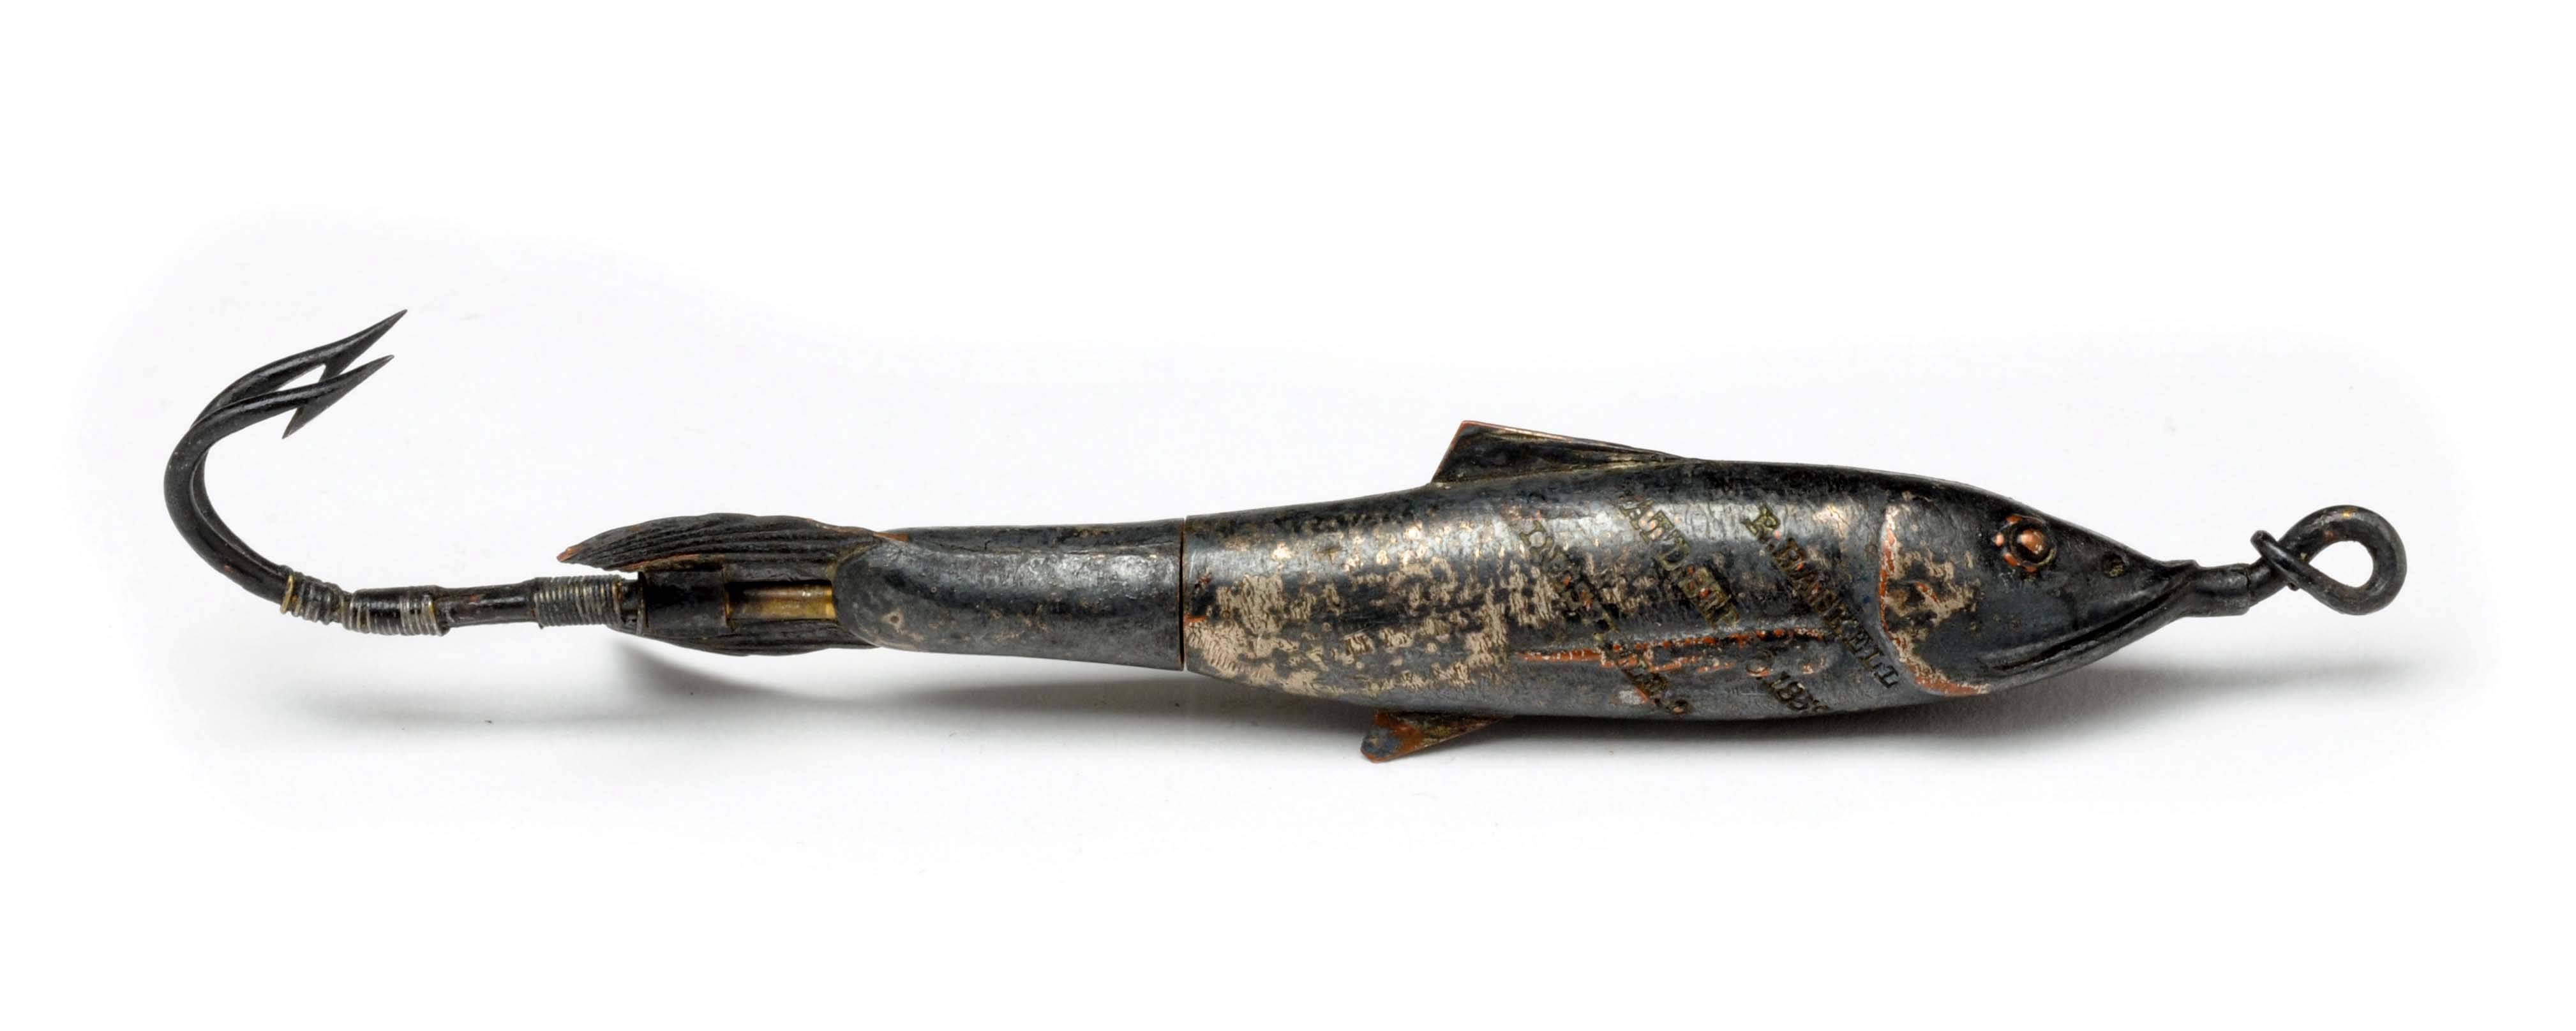 1859 Riley Haskell Minnow, estimated at $15,000-20,000.